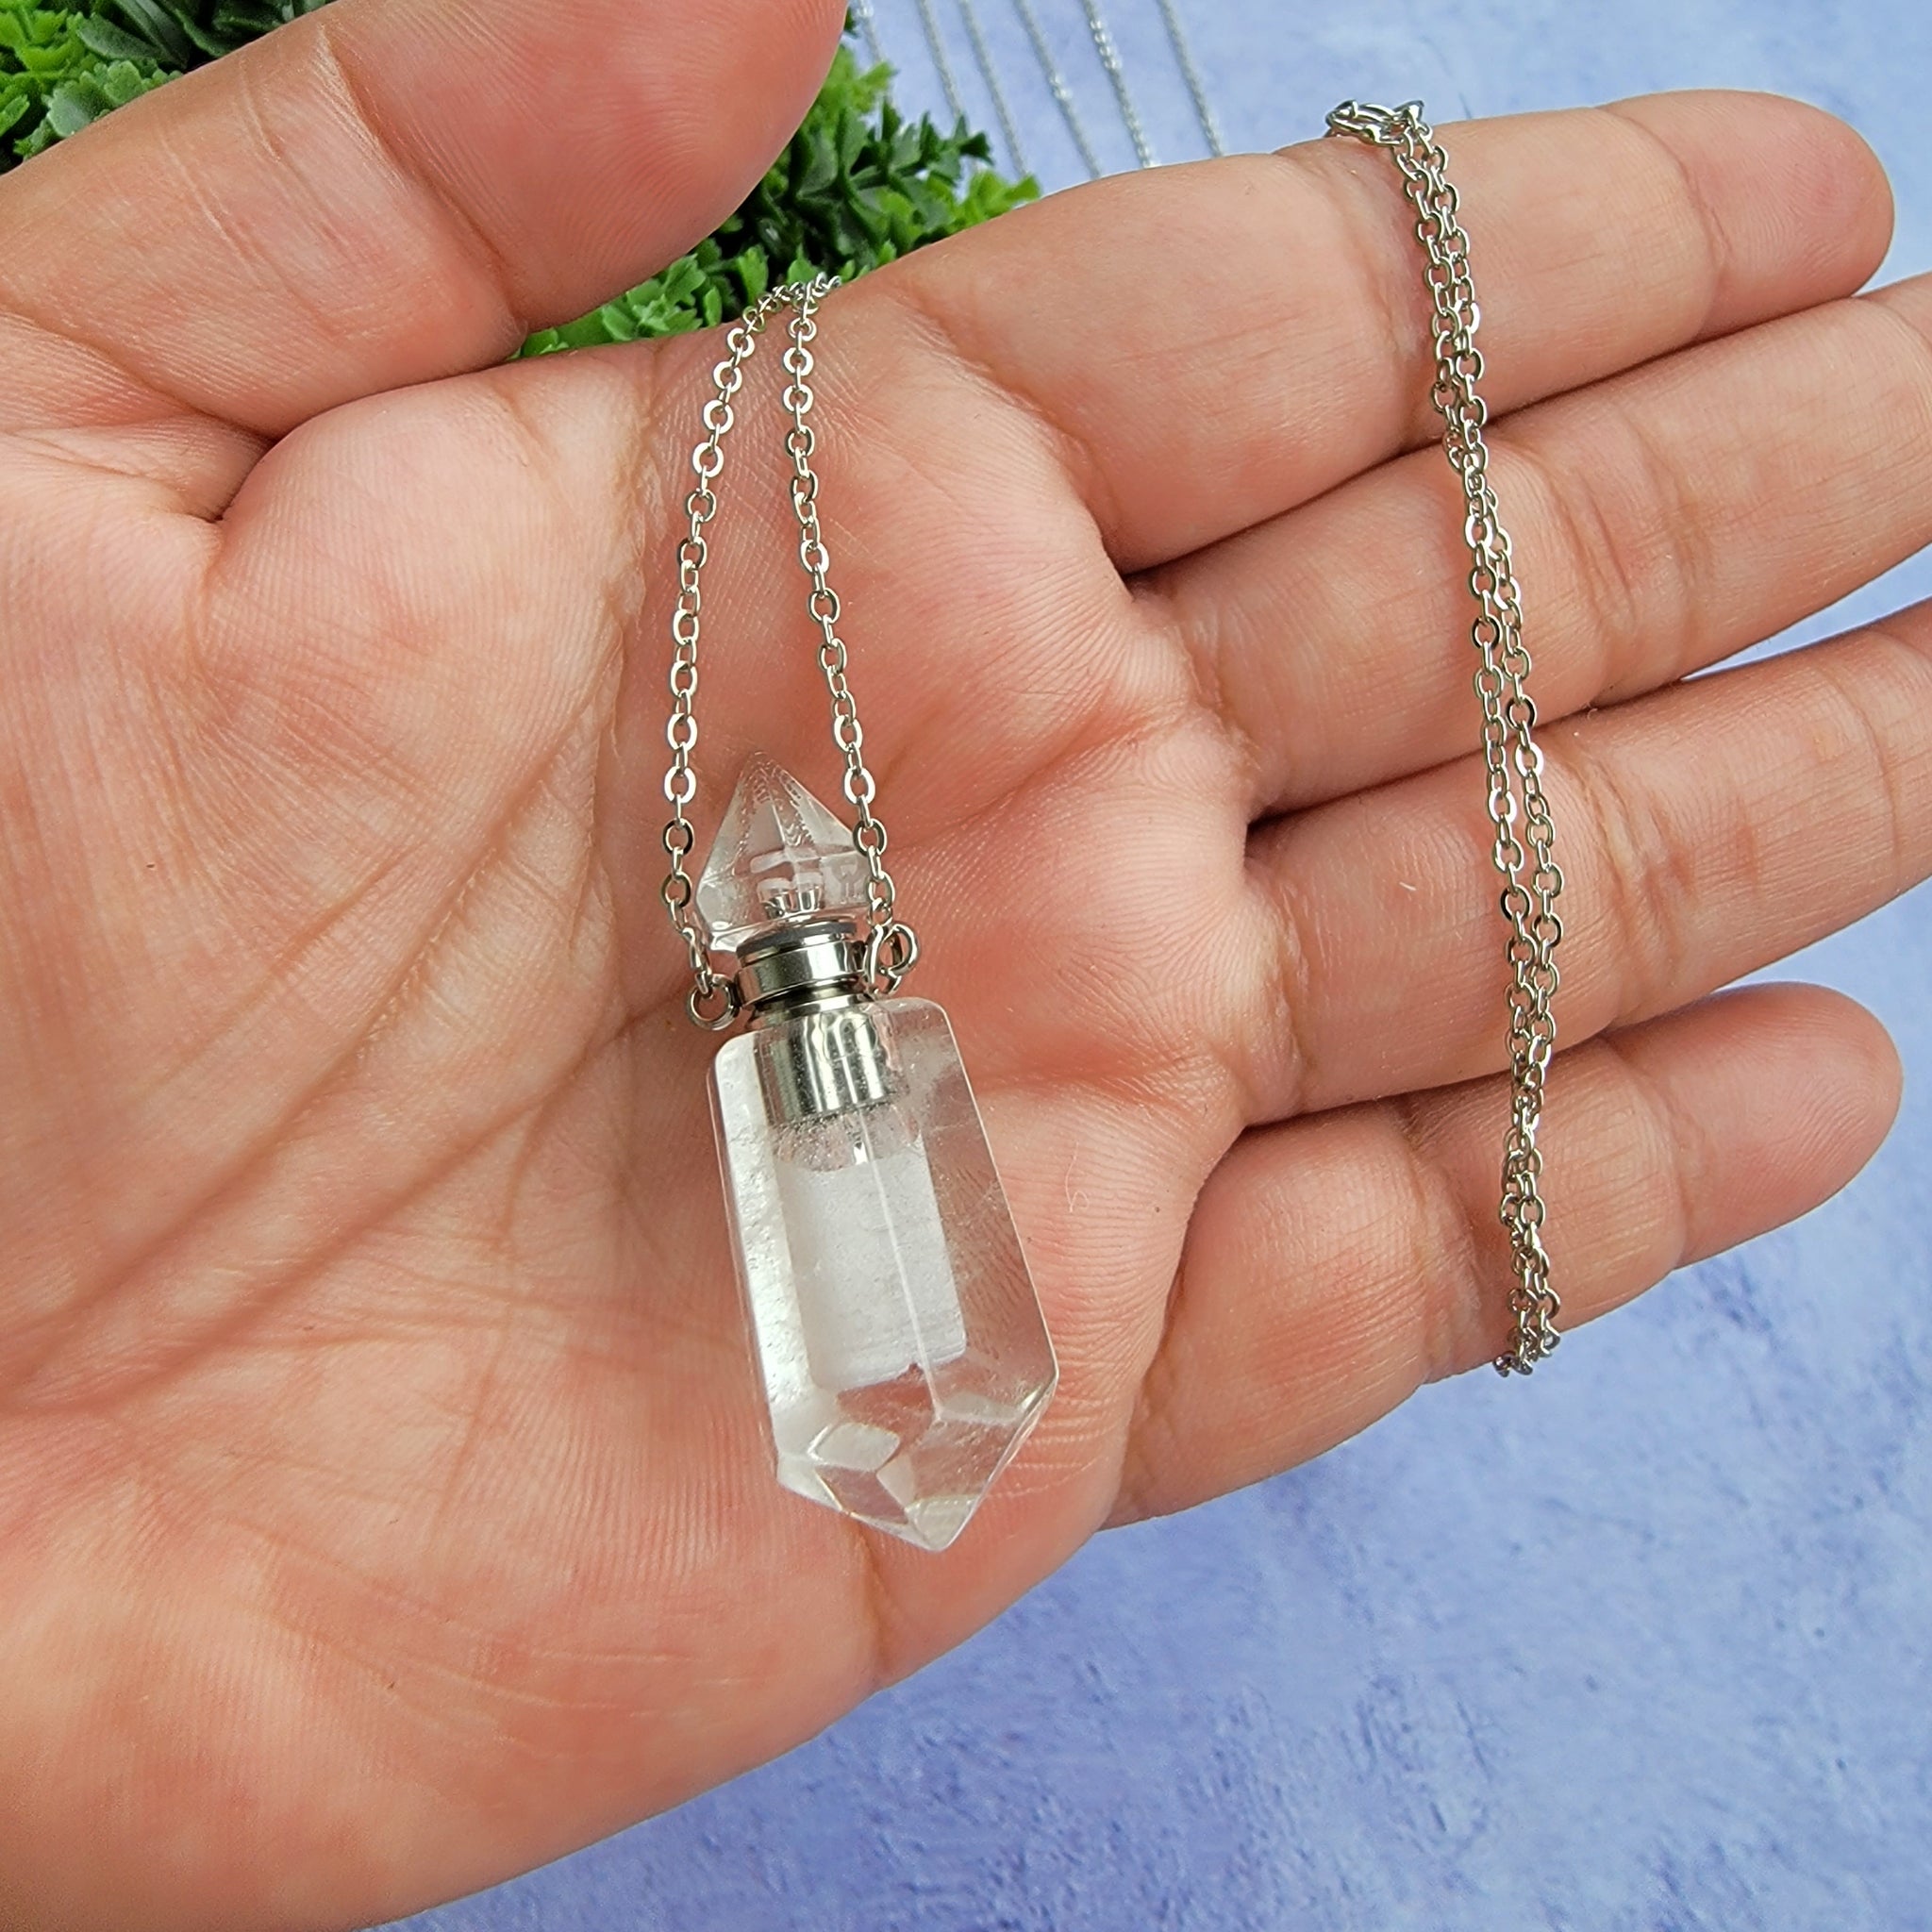 AETTP 10PCS Crystal Vial Pendants Miniature Perfume Bottle Charms Rice vials  Screw Cap Necklace Rice Charms DIY Name on Rice Art Blue Prismatic :  Amazon.co.uk: Home & Kitchen